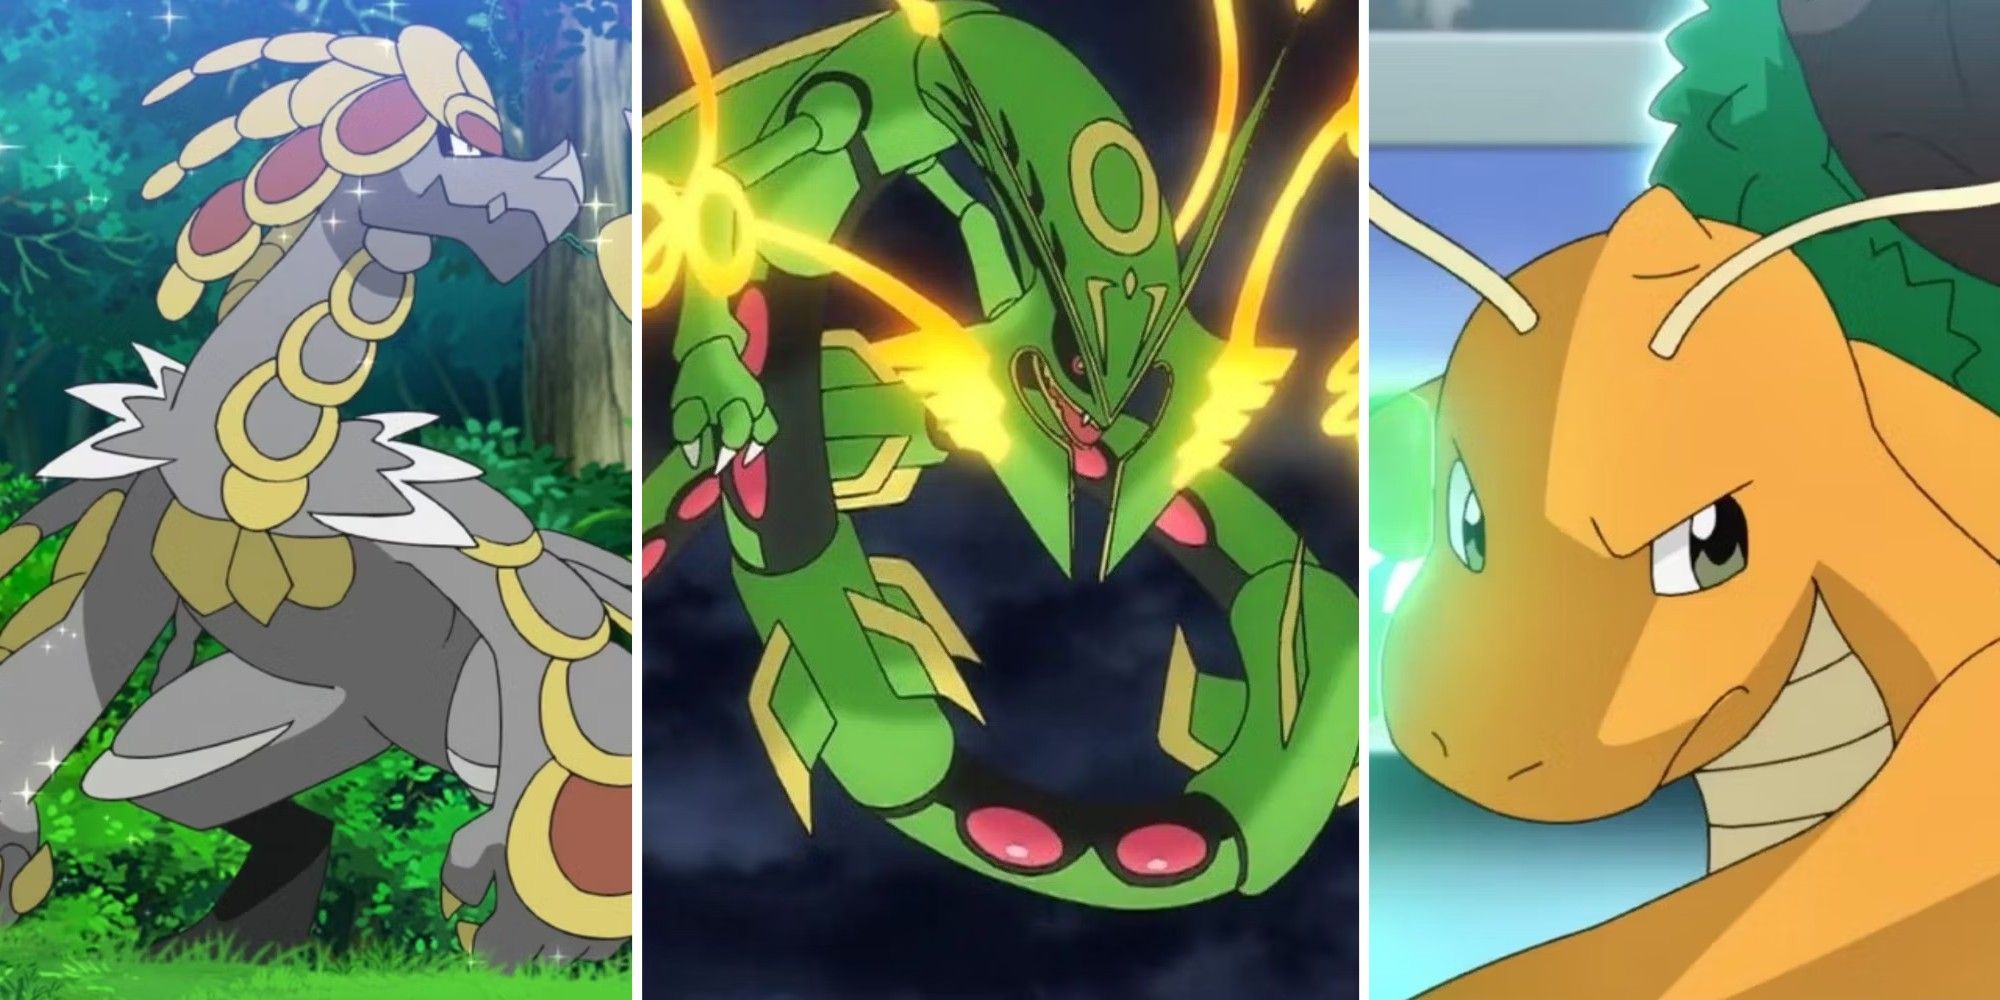 Dragon Types Pokemon Kommo-O, Rayquaza and Dragonite side by side